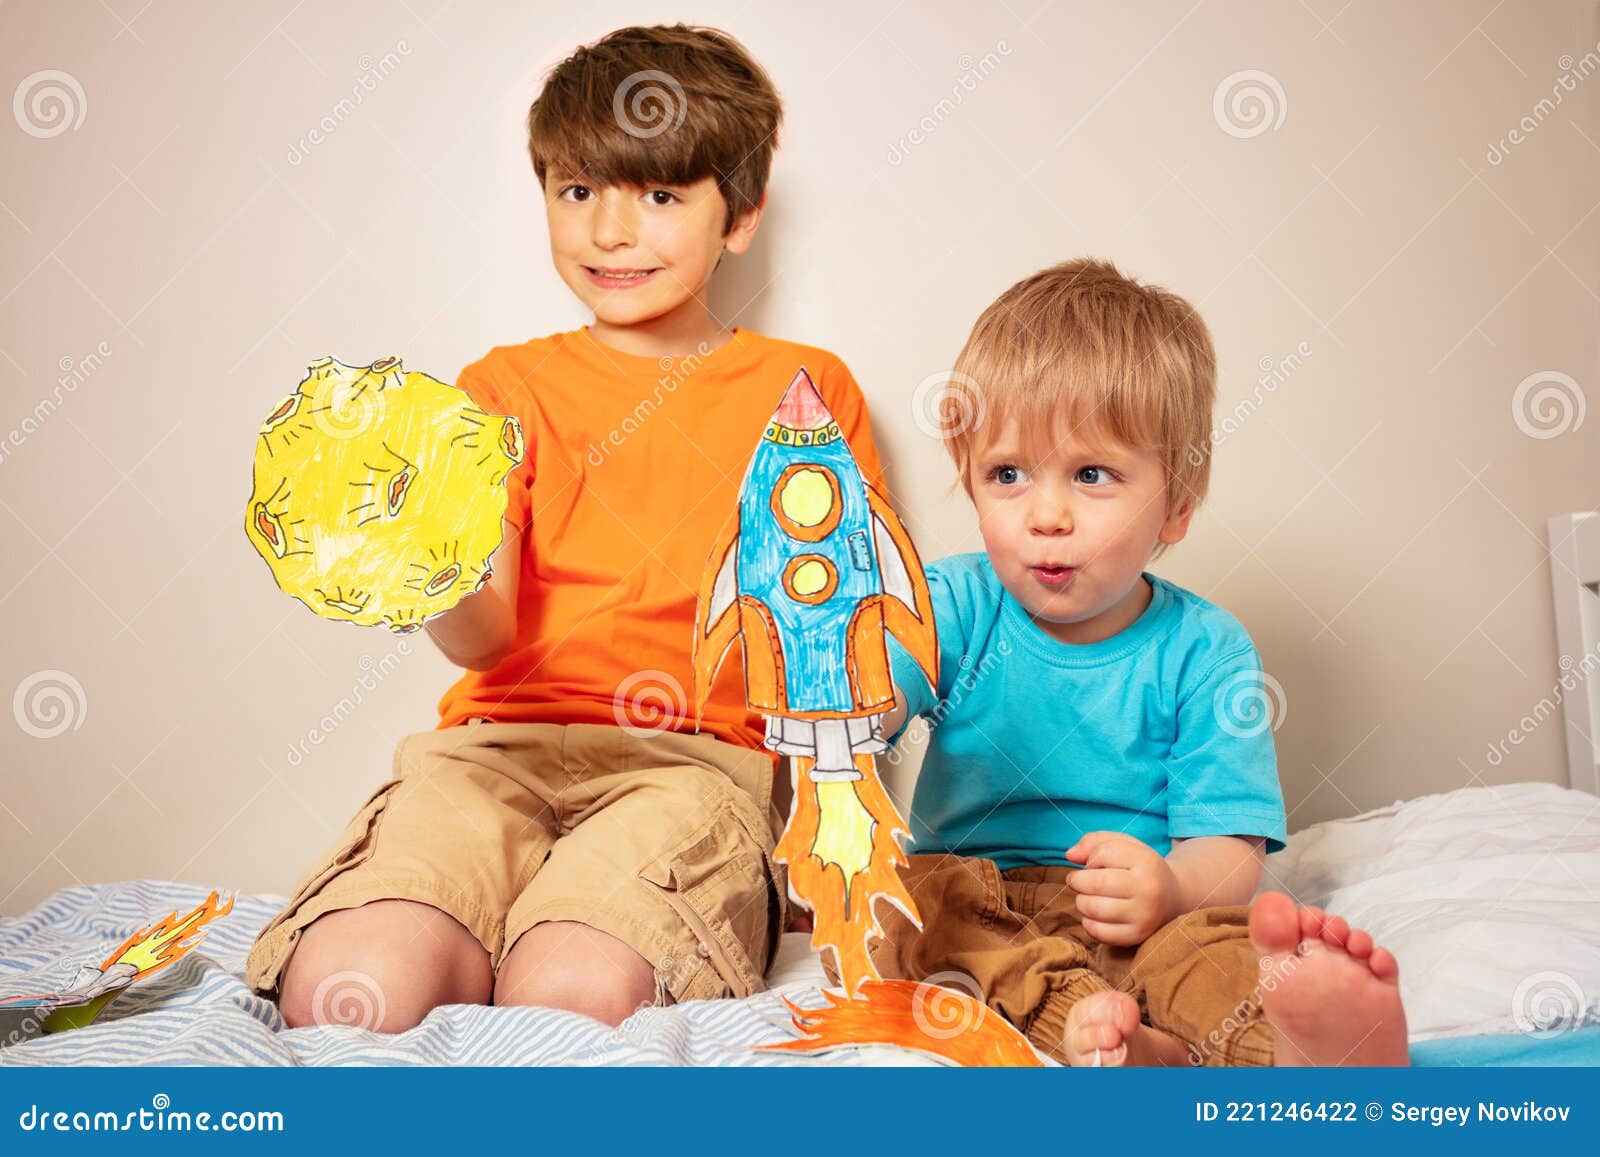 two boys play astronauts and rocker liftoff